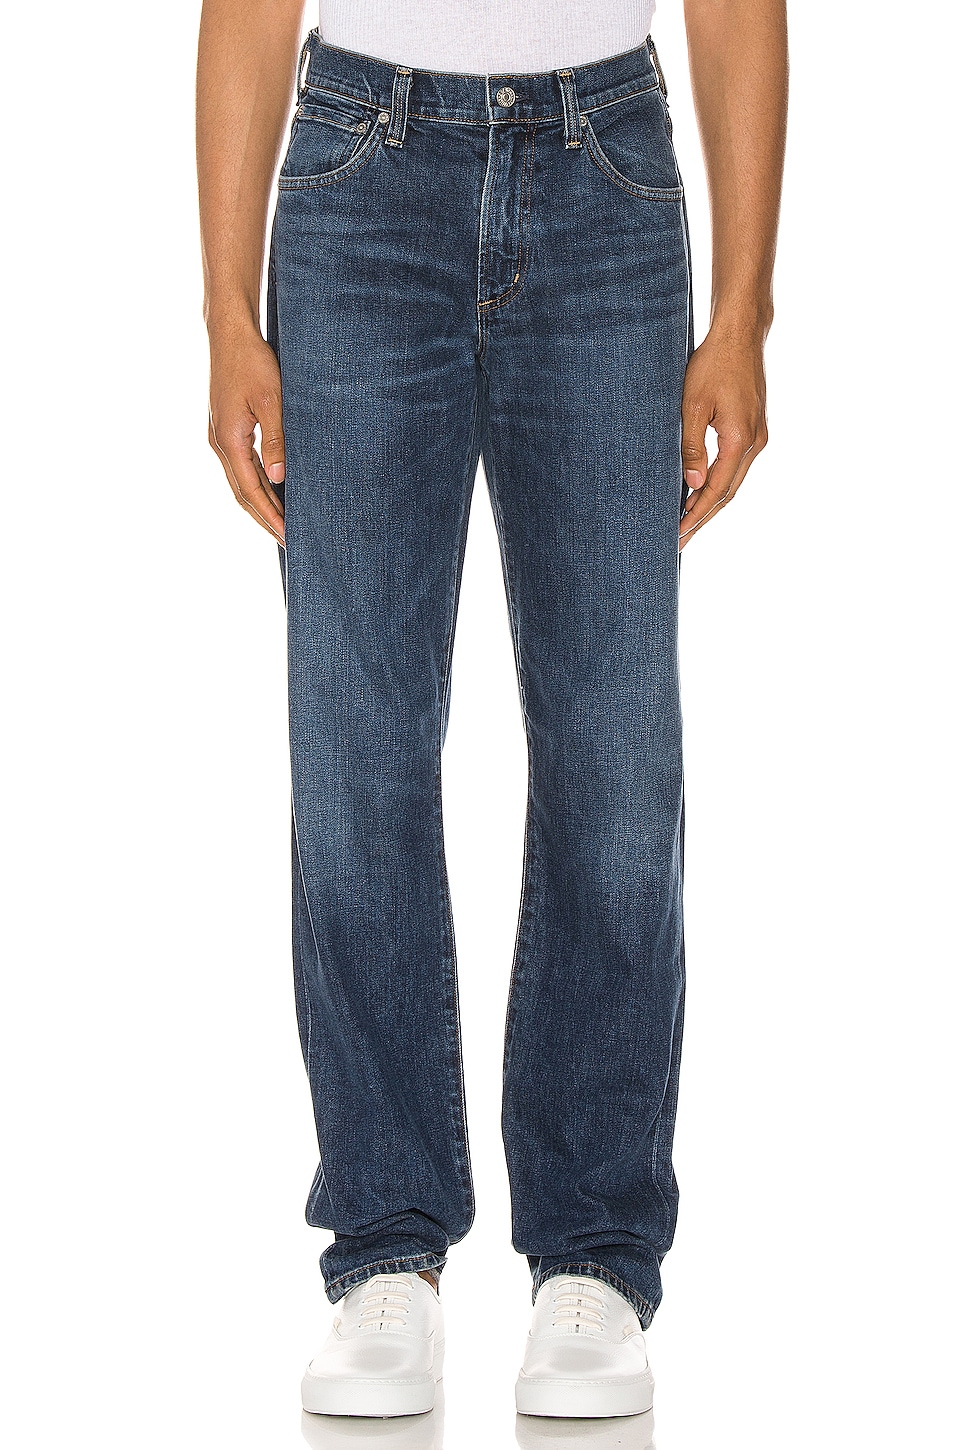 Citizens of Humanity Sid Straight Jean in Apollo | REVOLVE